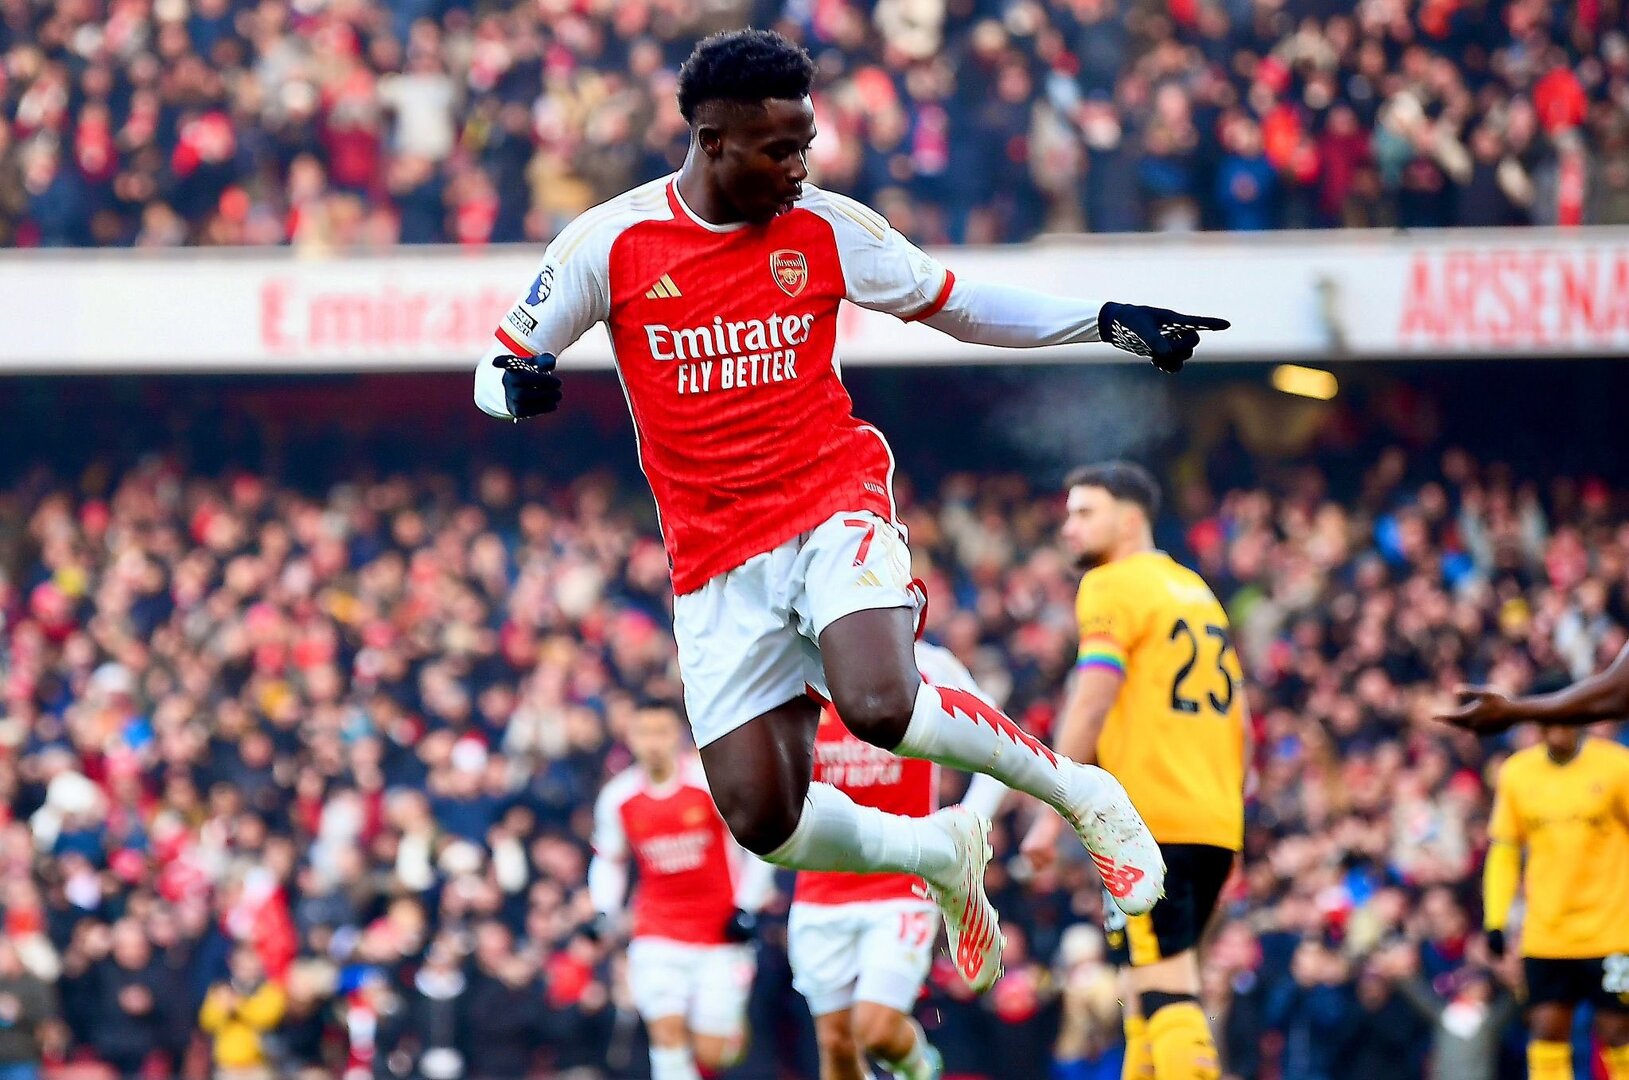 Top five youngest players to make 200 appearances for Arsenal